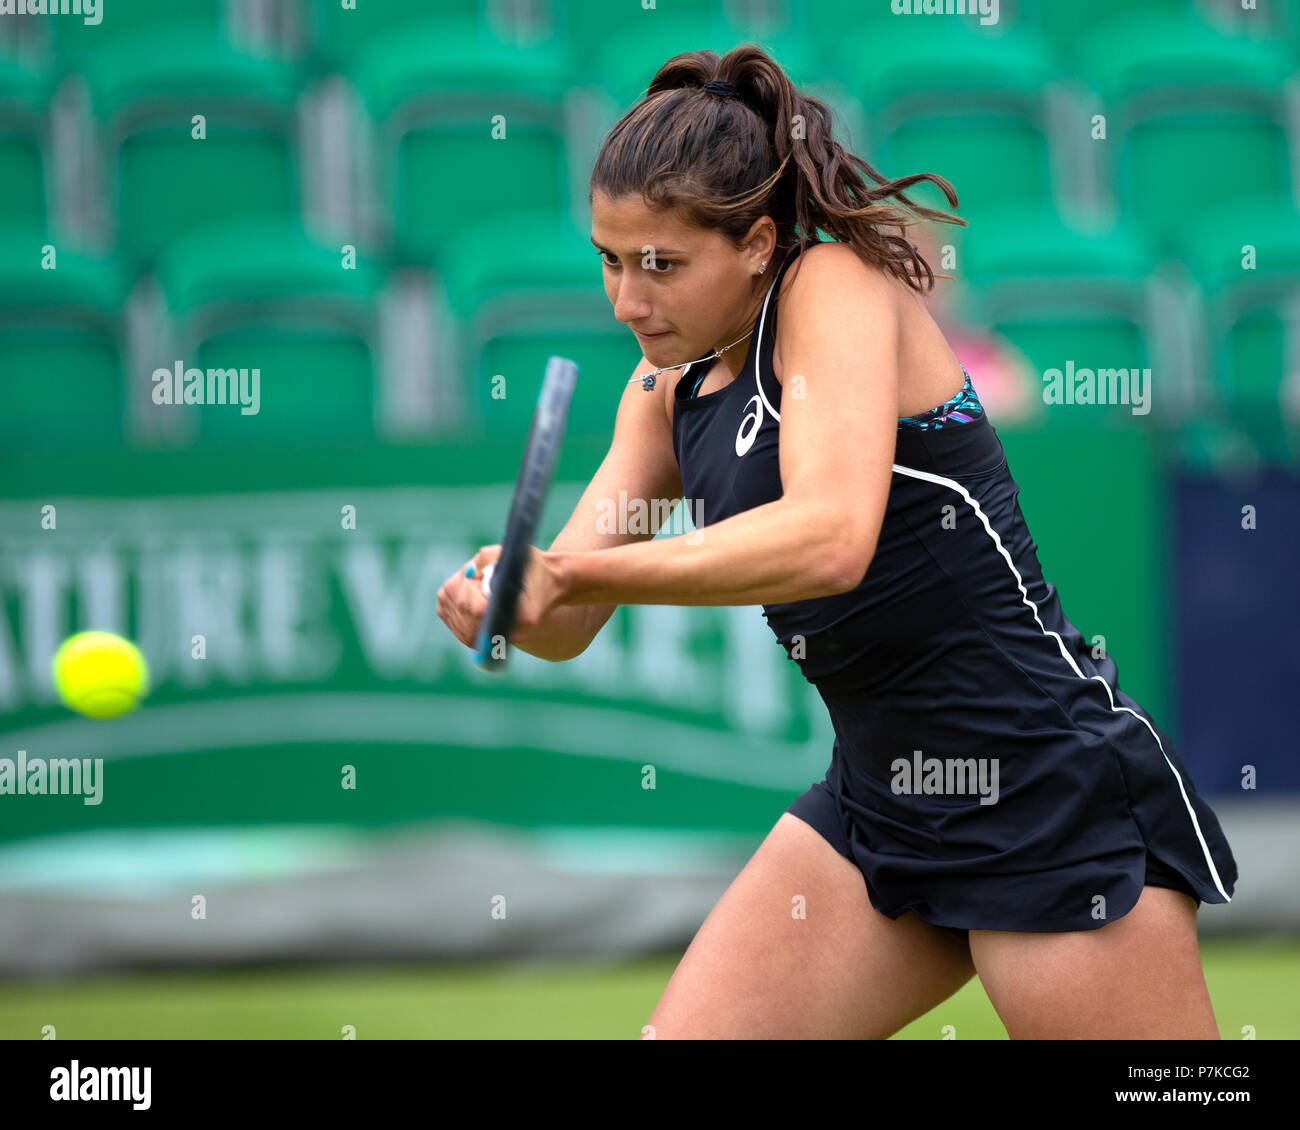 Jaimee Fourlis, professional tennis player from Australia, hits a shot during a match. Stock Photo